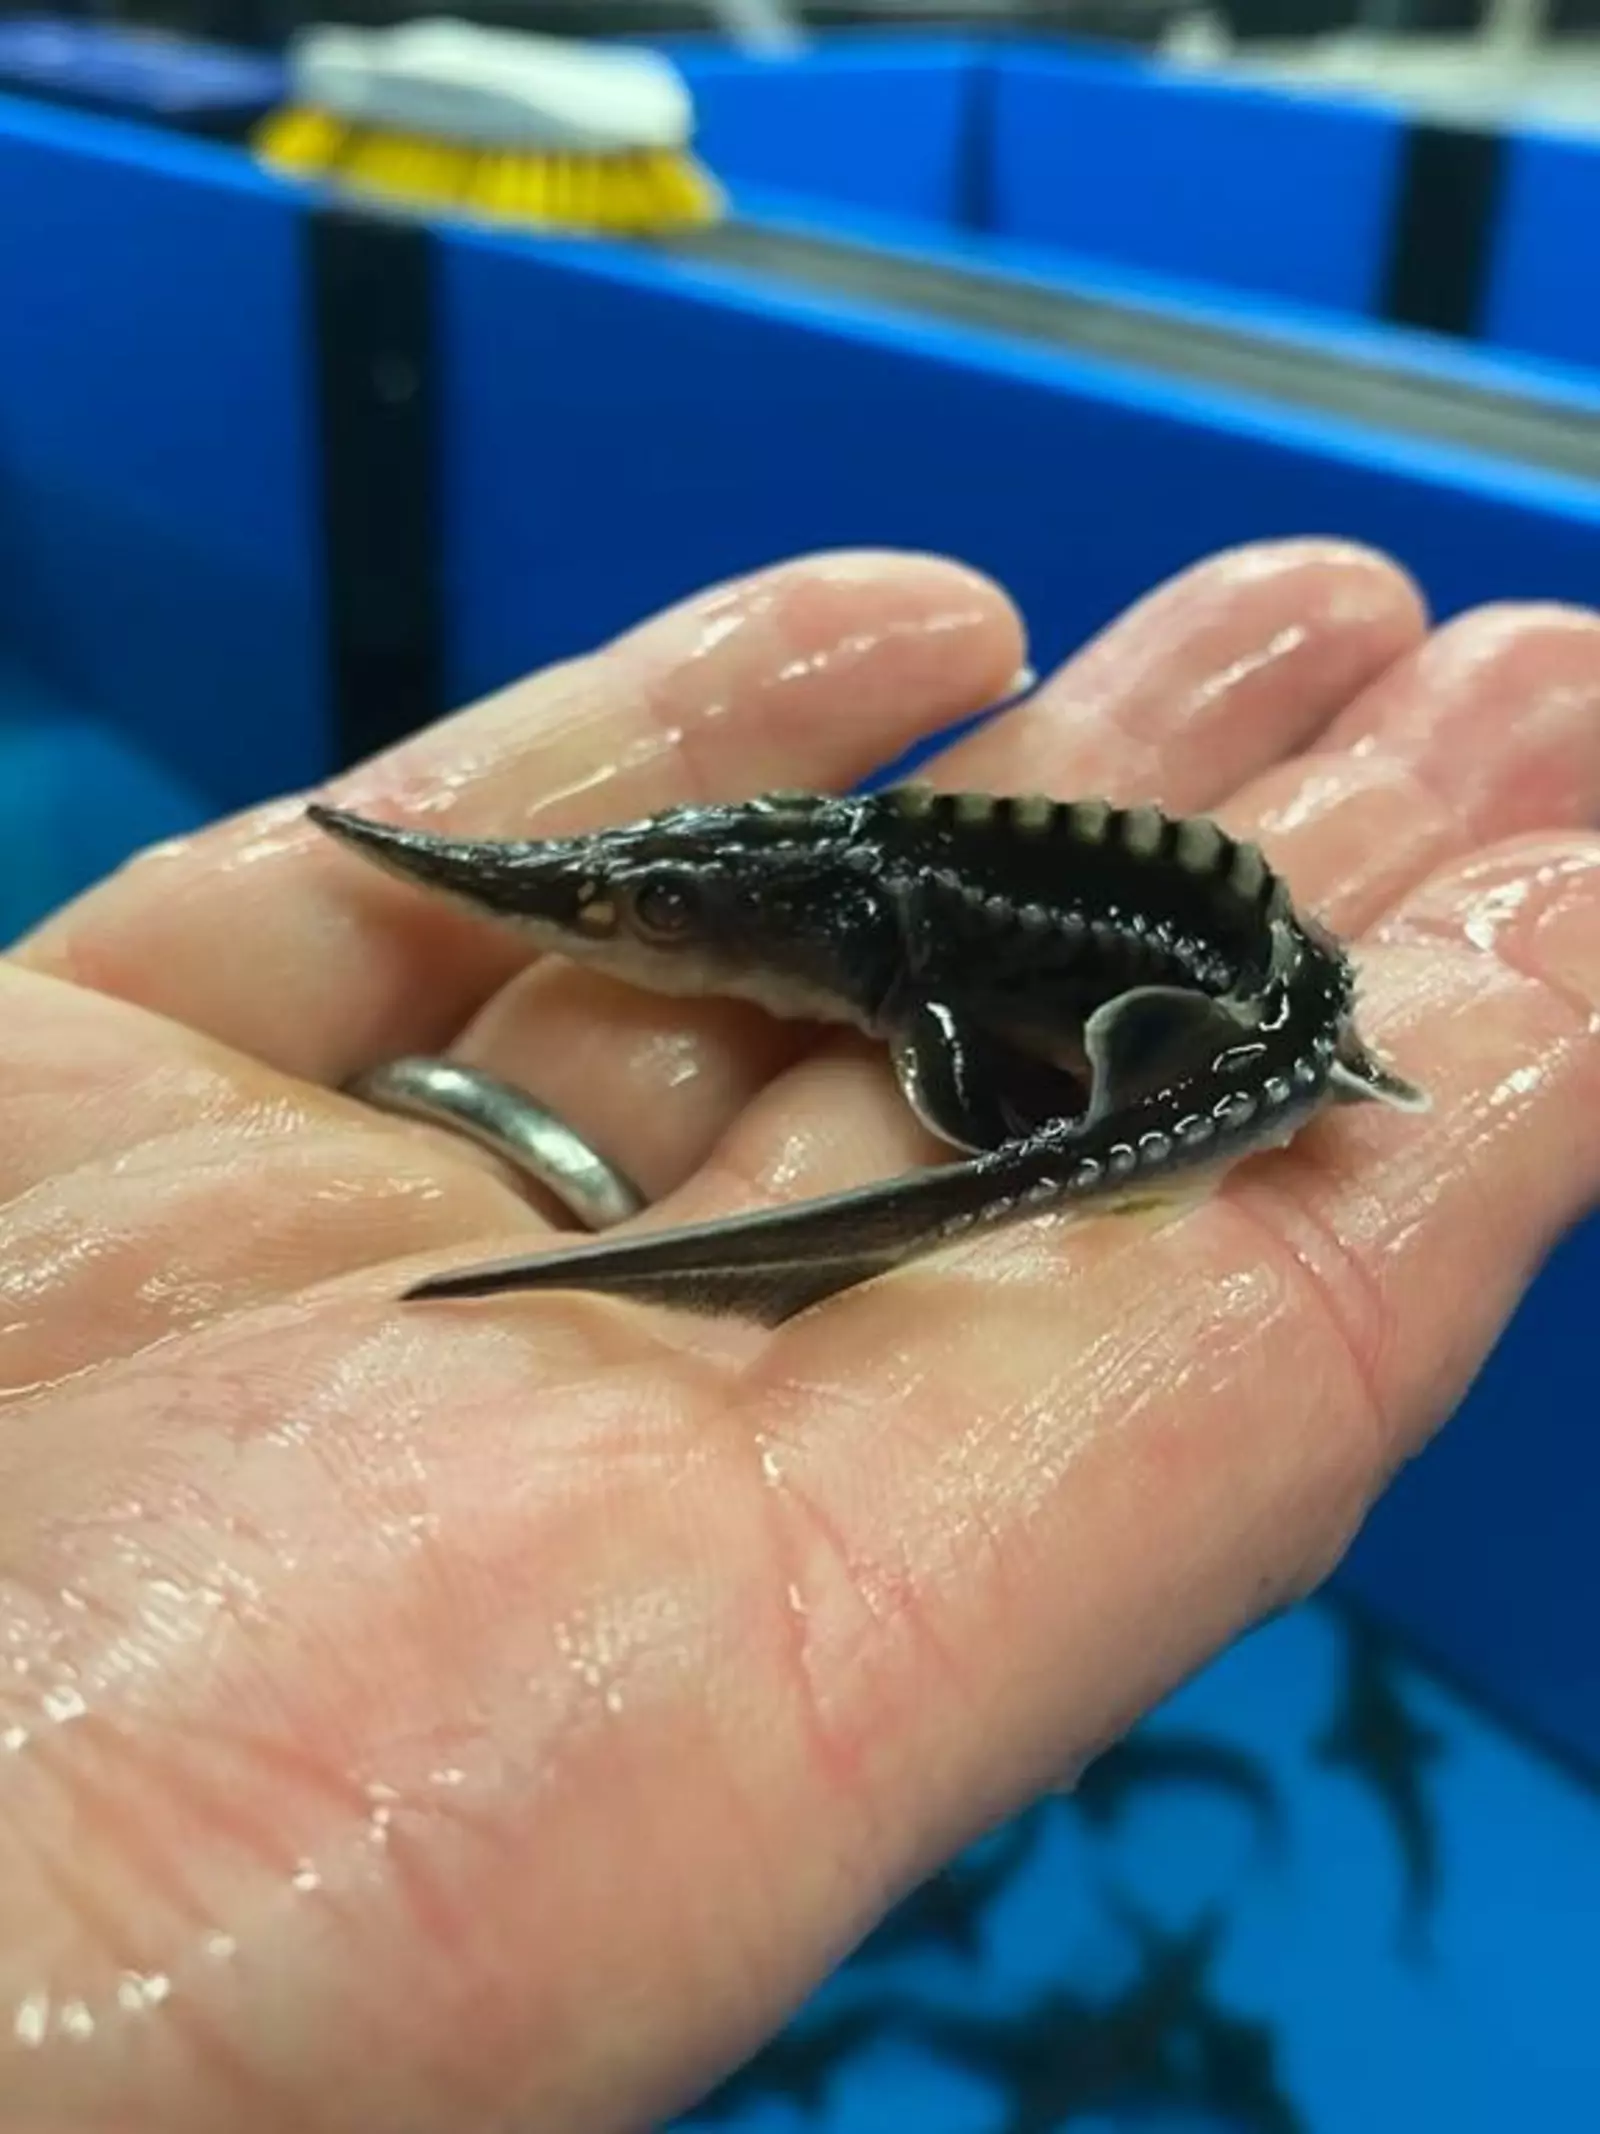 Juvenile sturgeon, in the palm of a conservationists hand